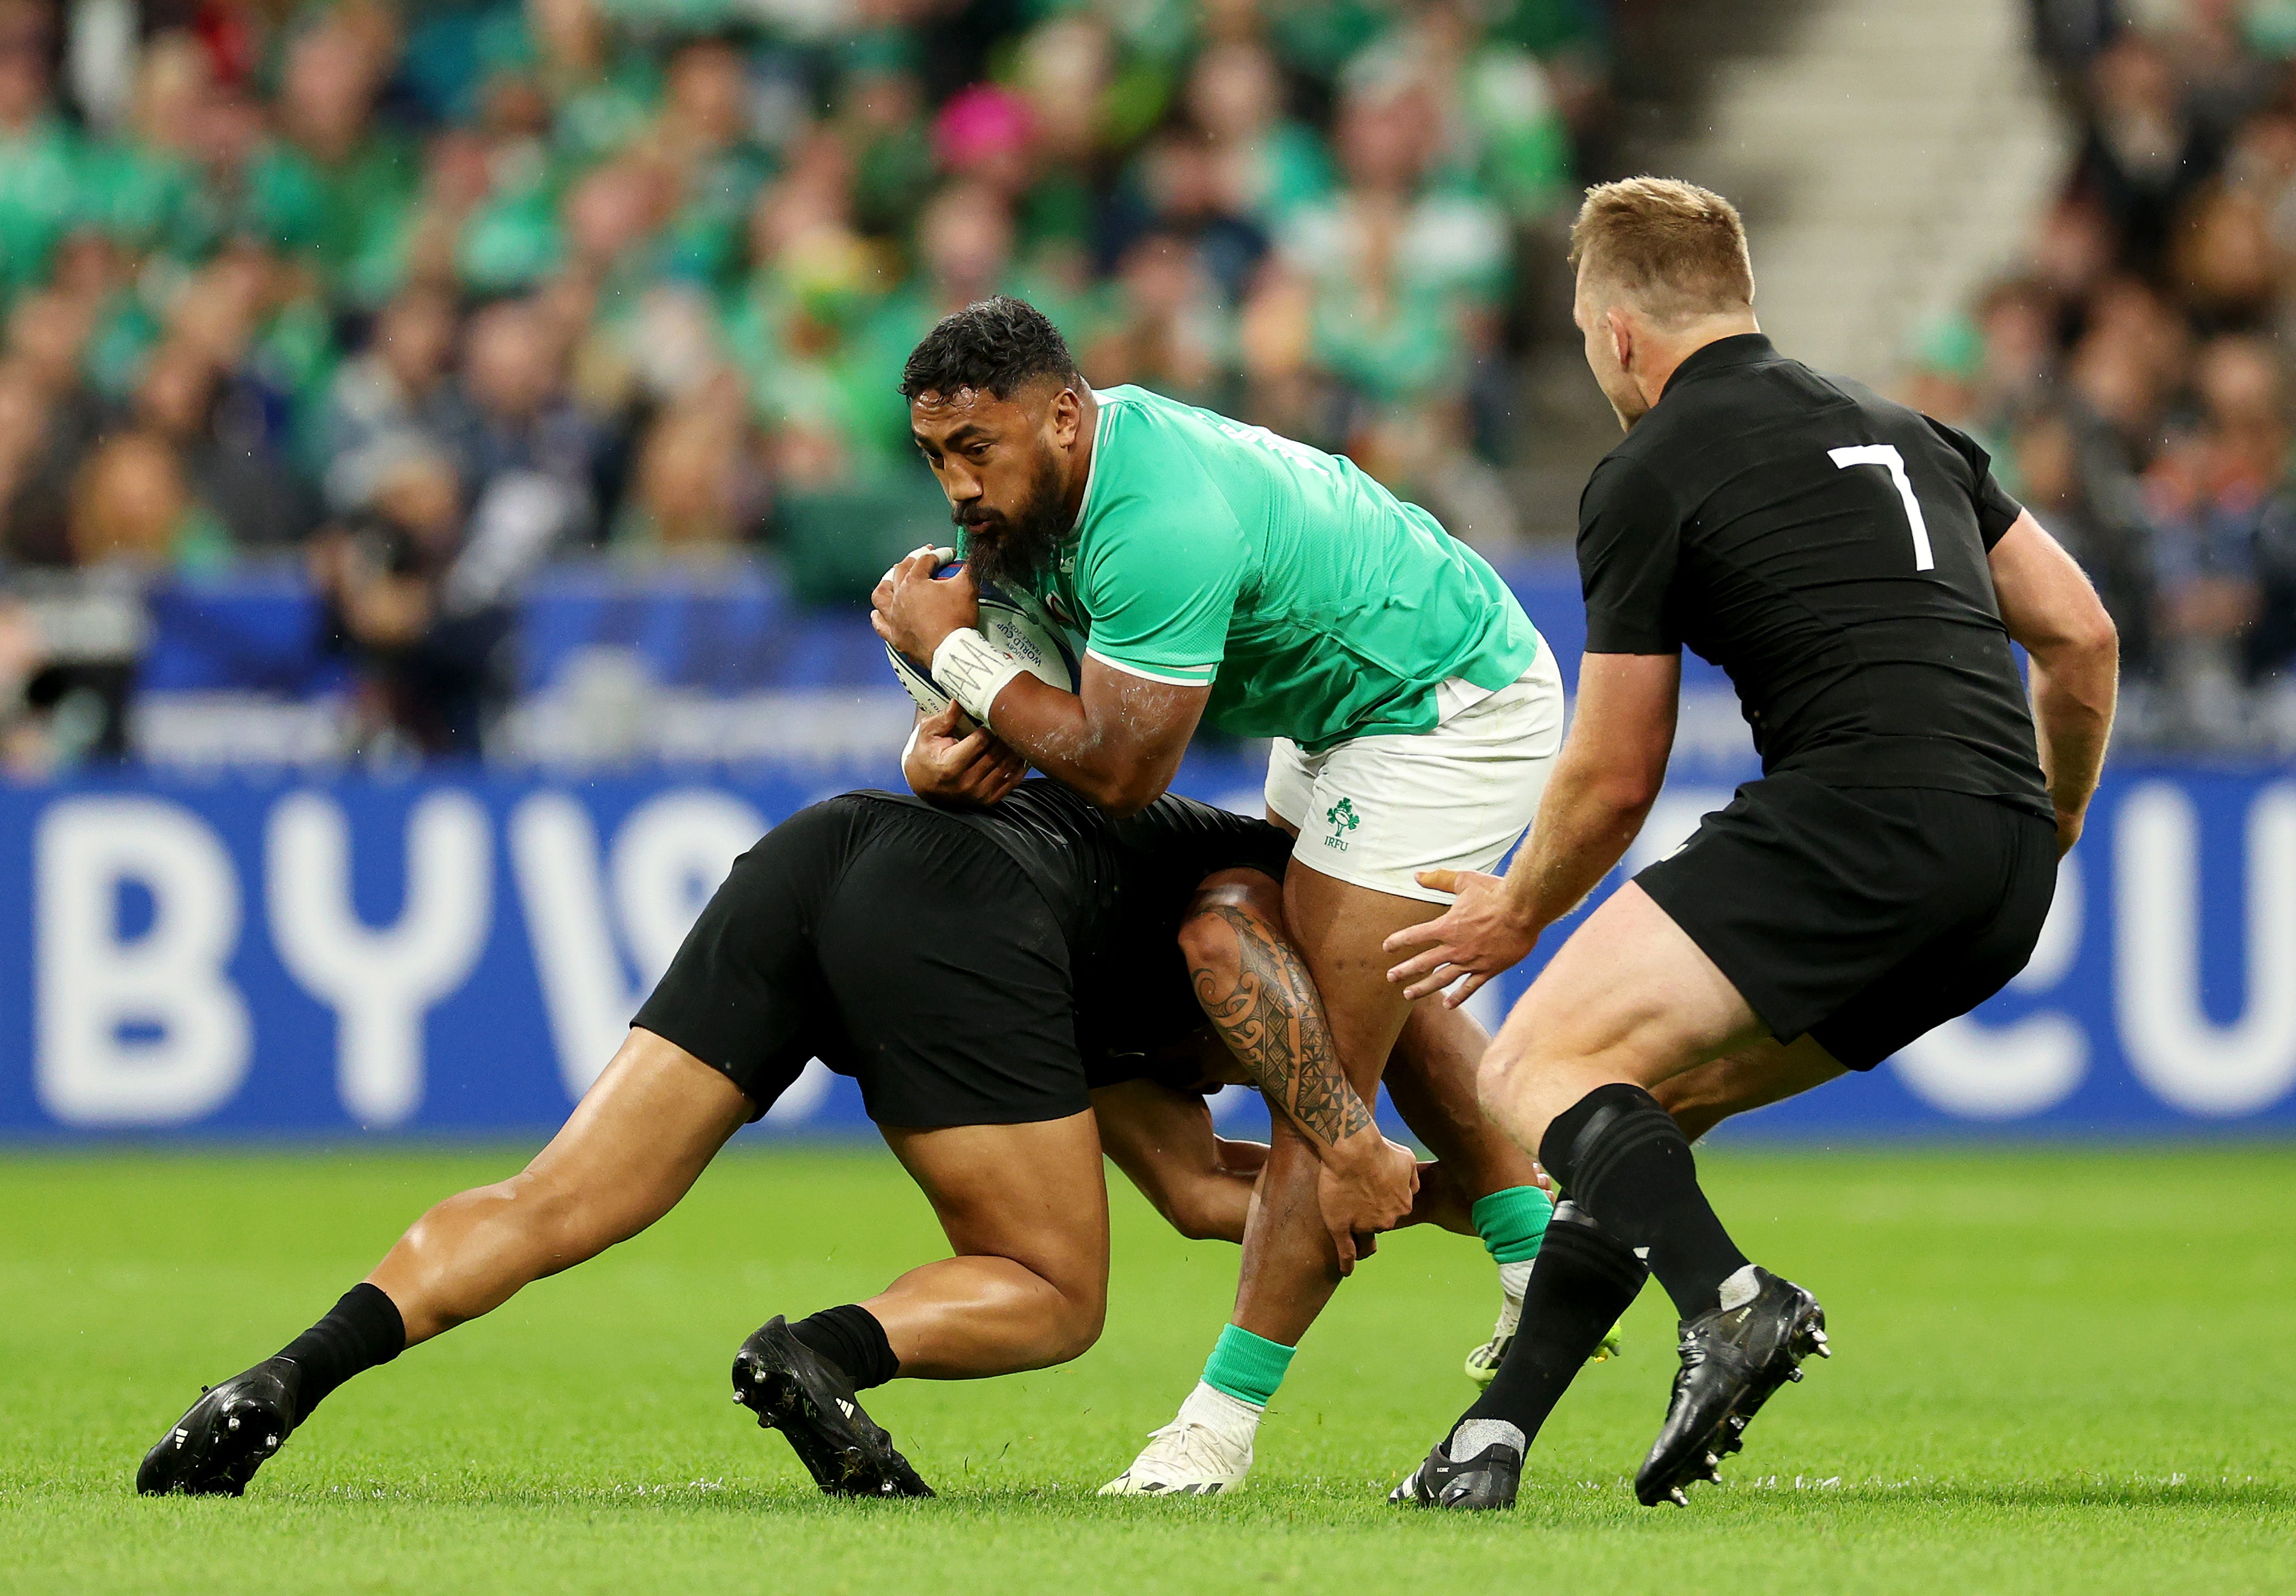 Ireland and New Zealand’s quarter-final was thrilling